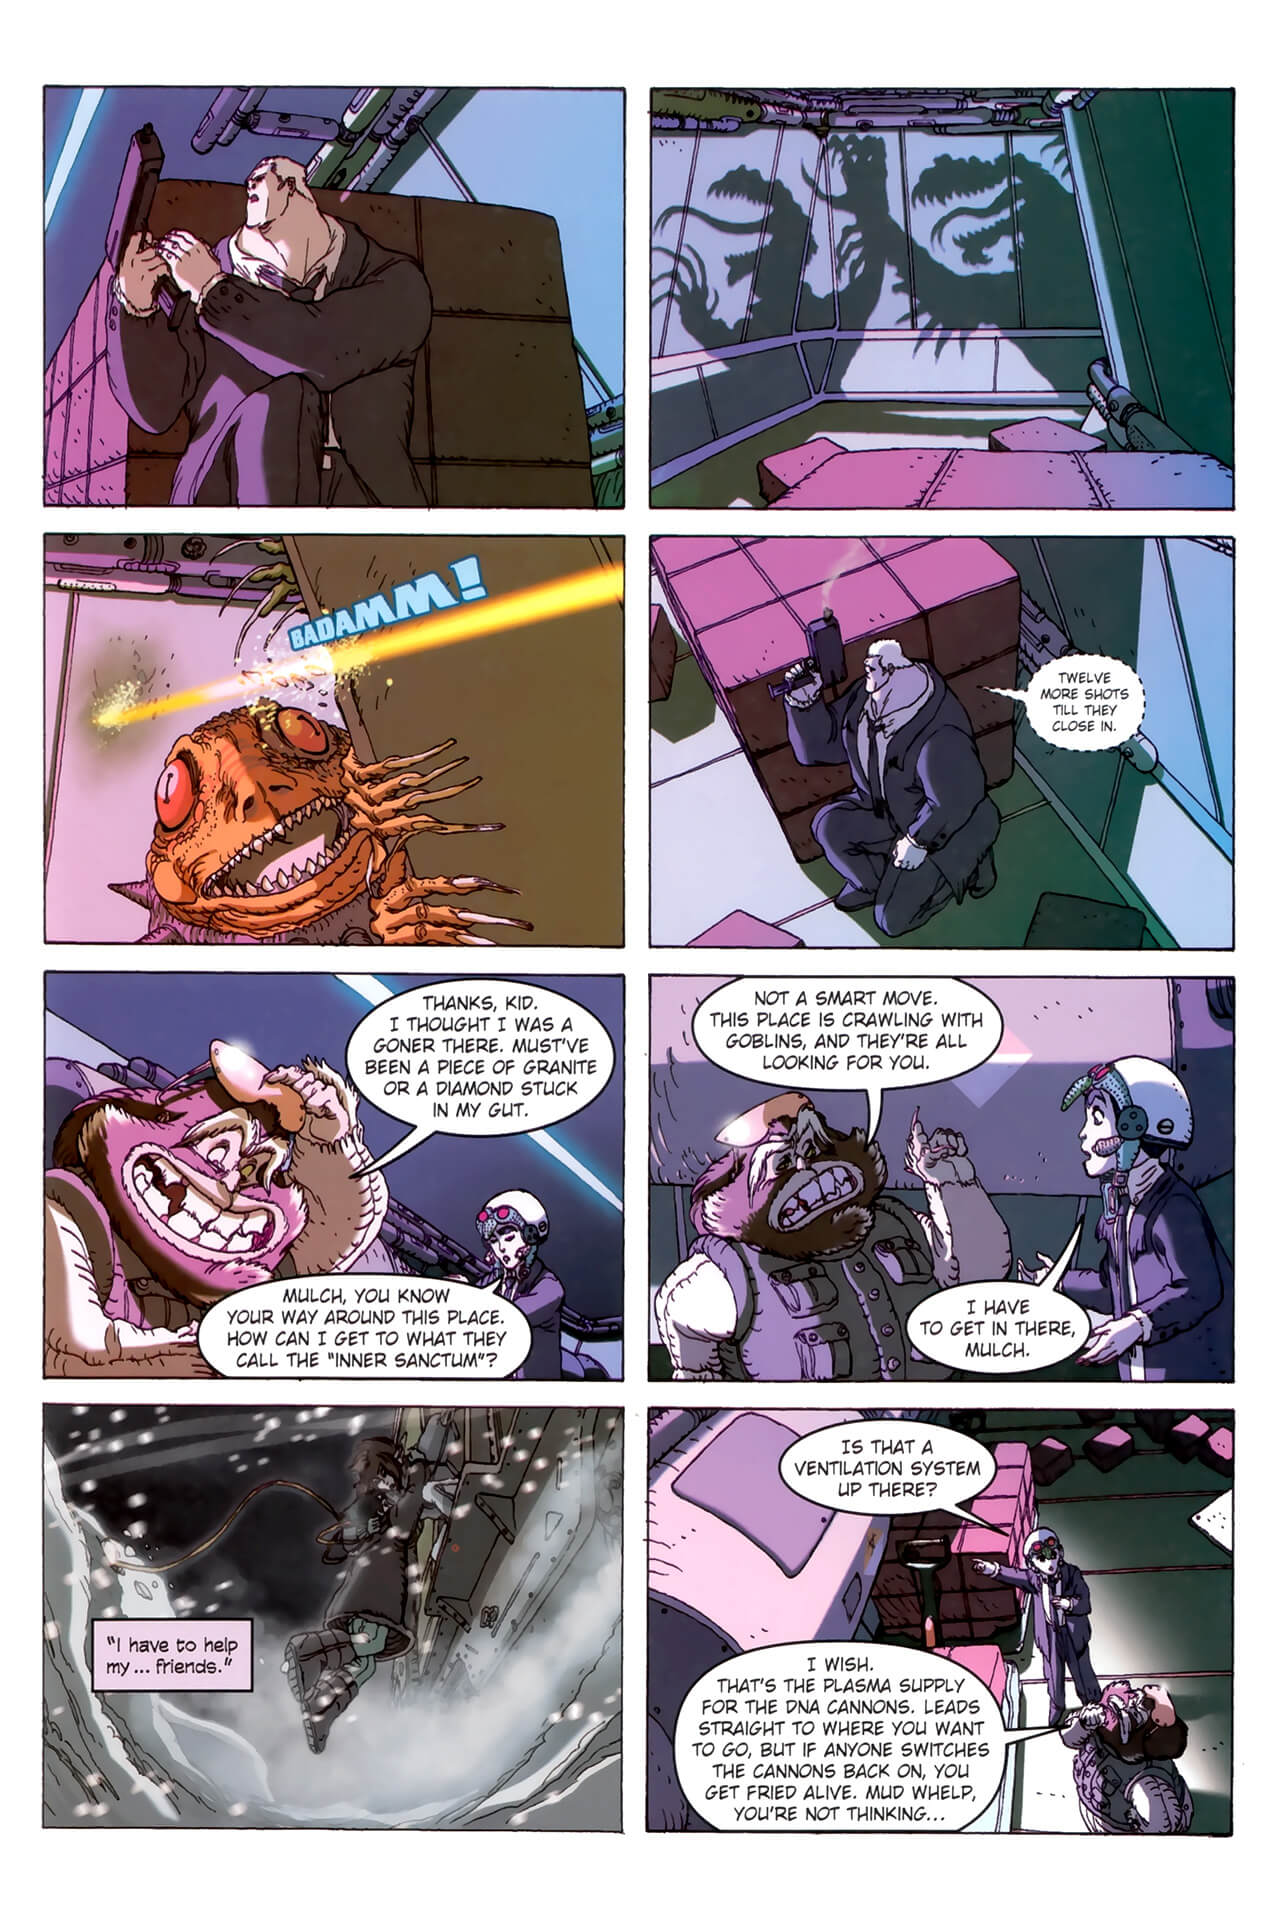 page 107 of artemis fowl the arctic incident graphic novel